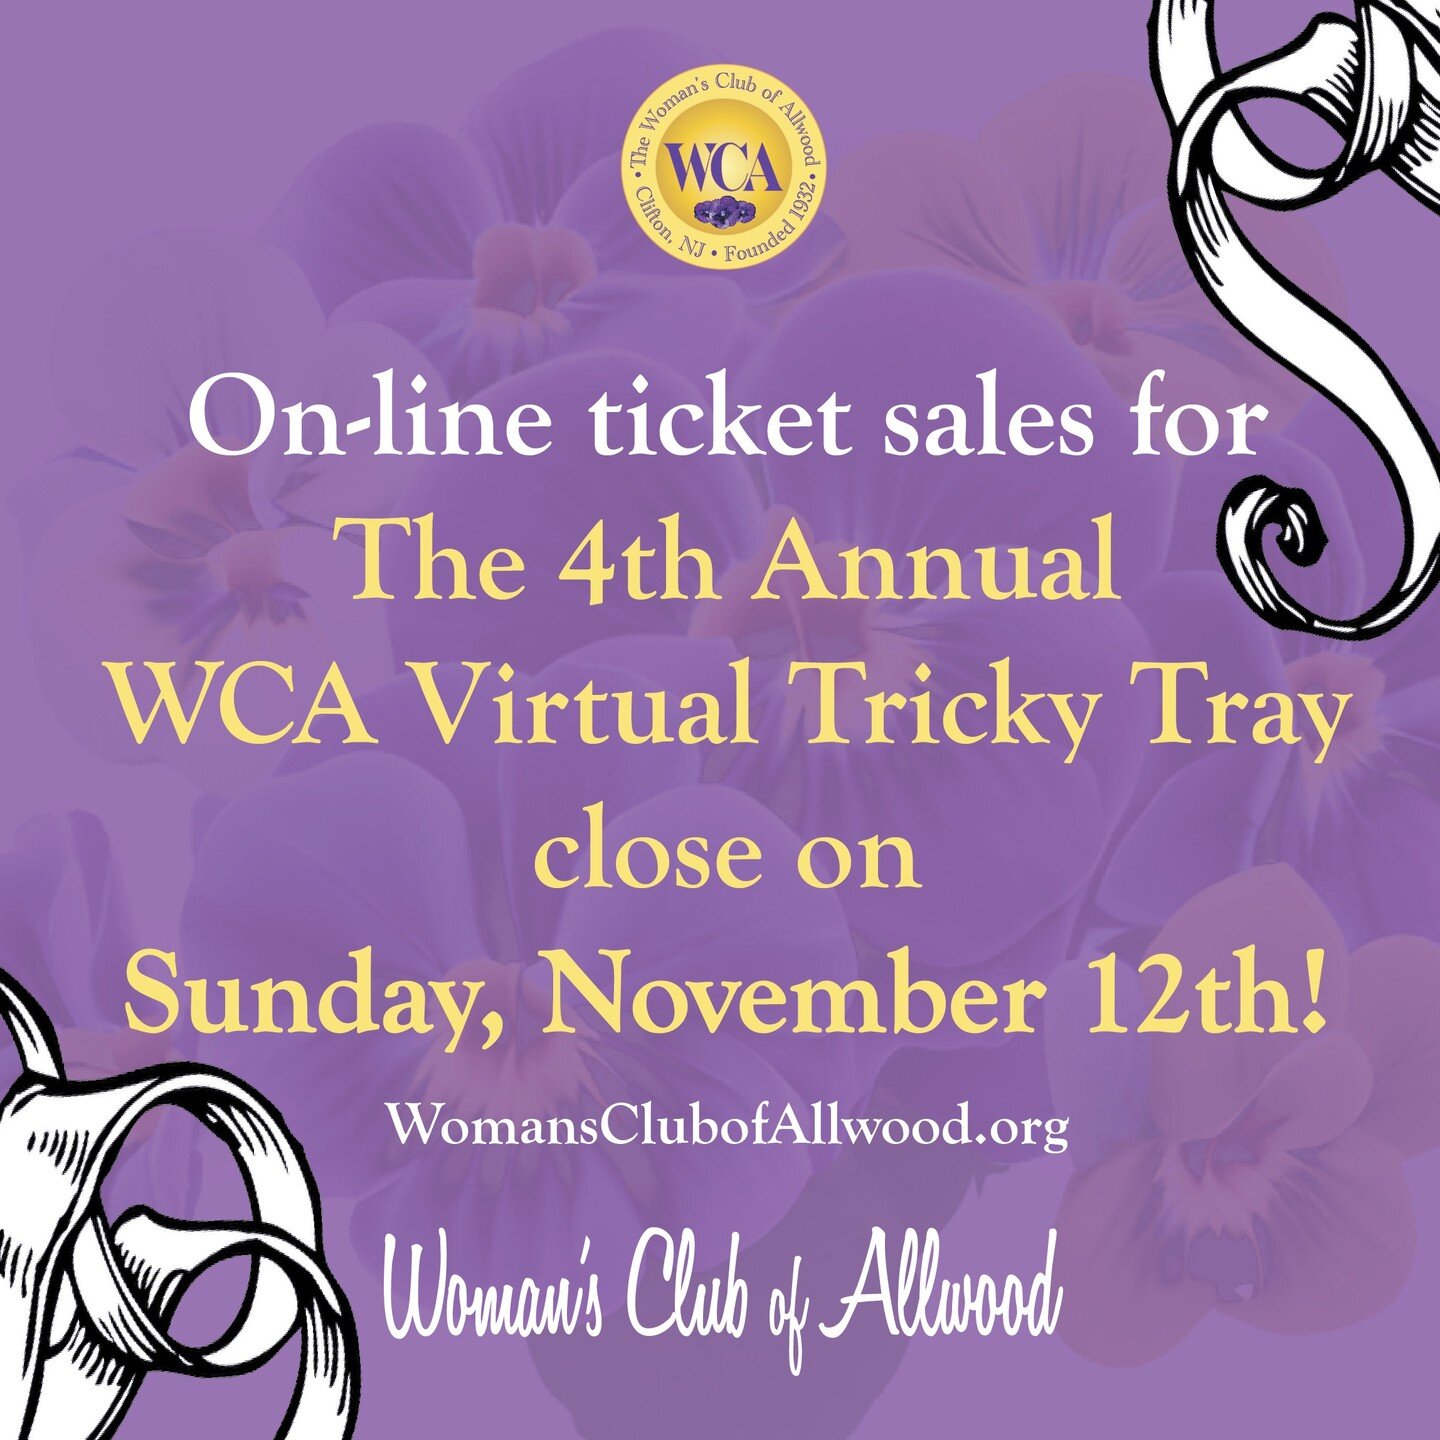 Amazing opportunities to win fabulous things this year for the 4th Annual WCA Virtual Tricky Tray! On-line ticket sales END SUNDAY Nov 12th at midnight! Visit womansclubofallwood.org (LINK IN BIO) to purchase your tickets. There are more amazing gift